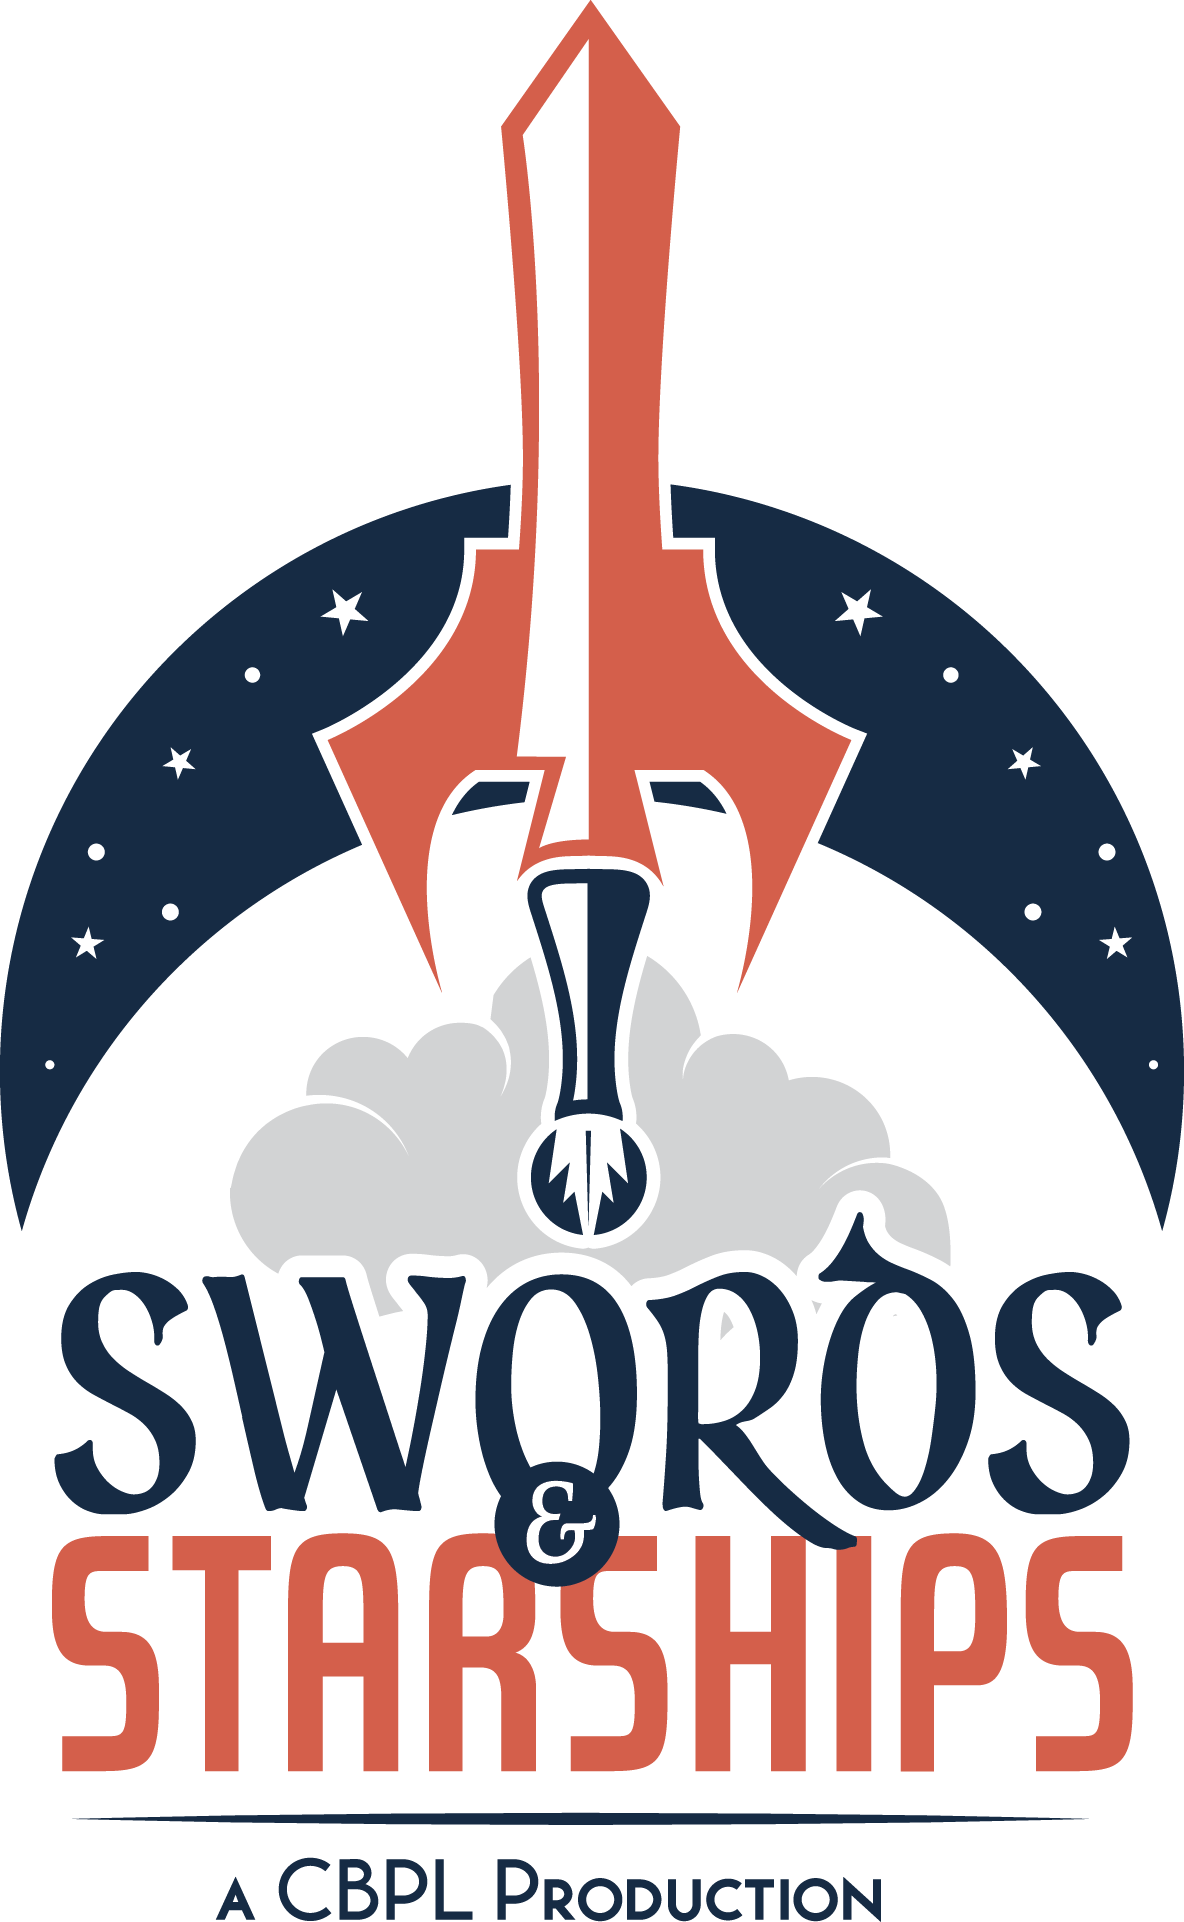 Swords and Starships Podcast